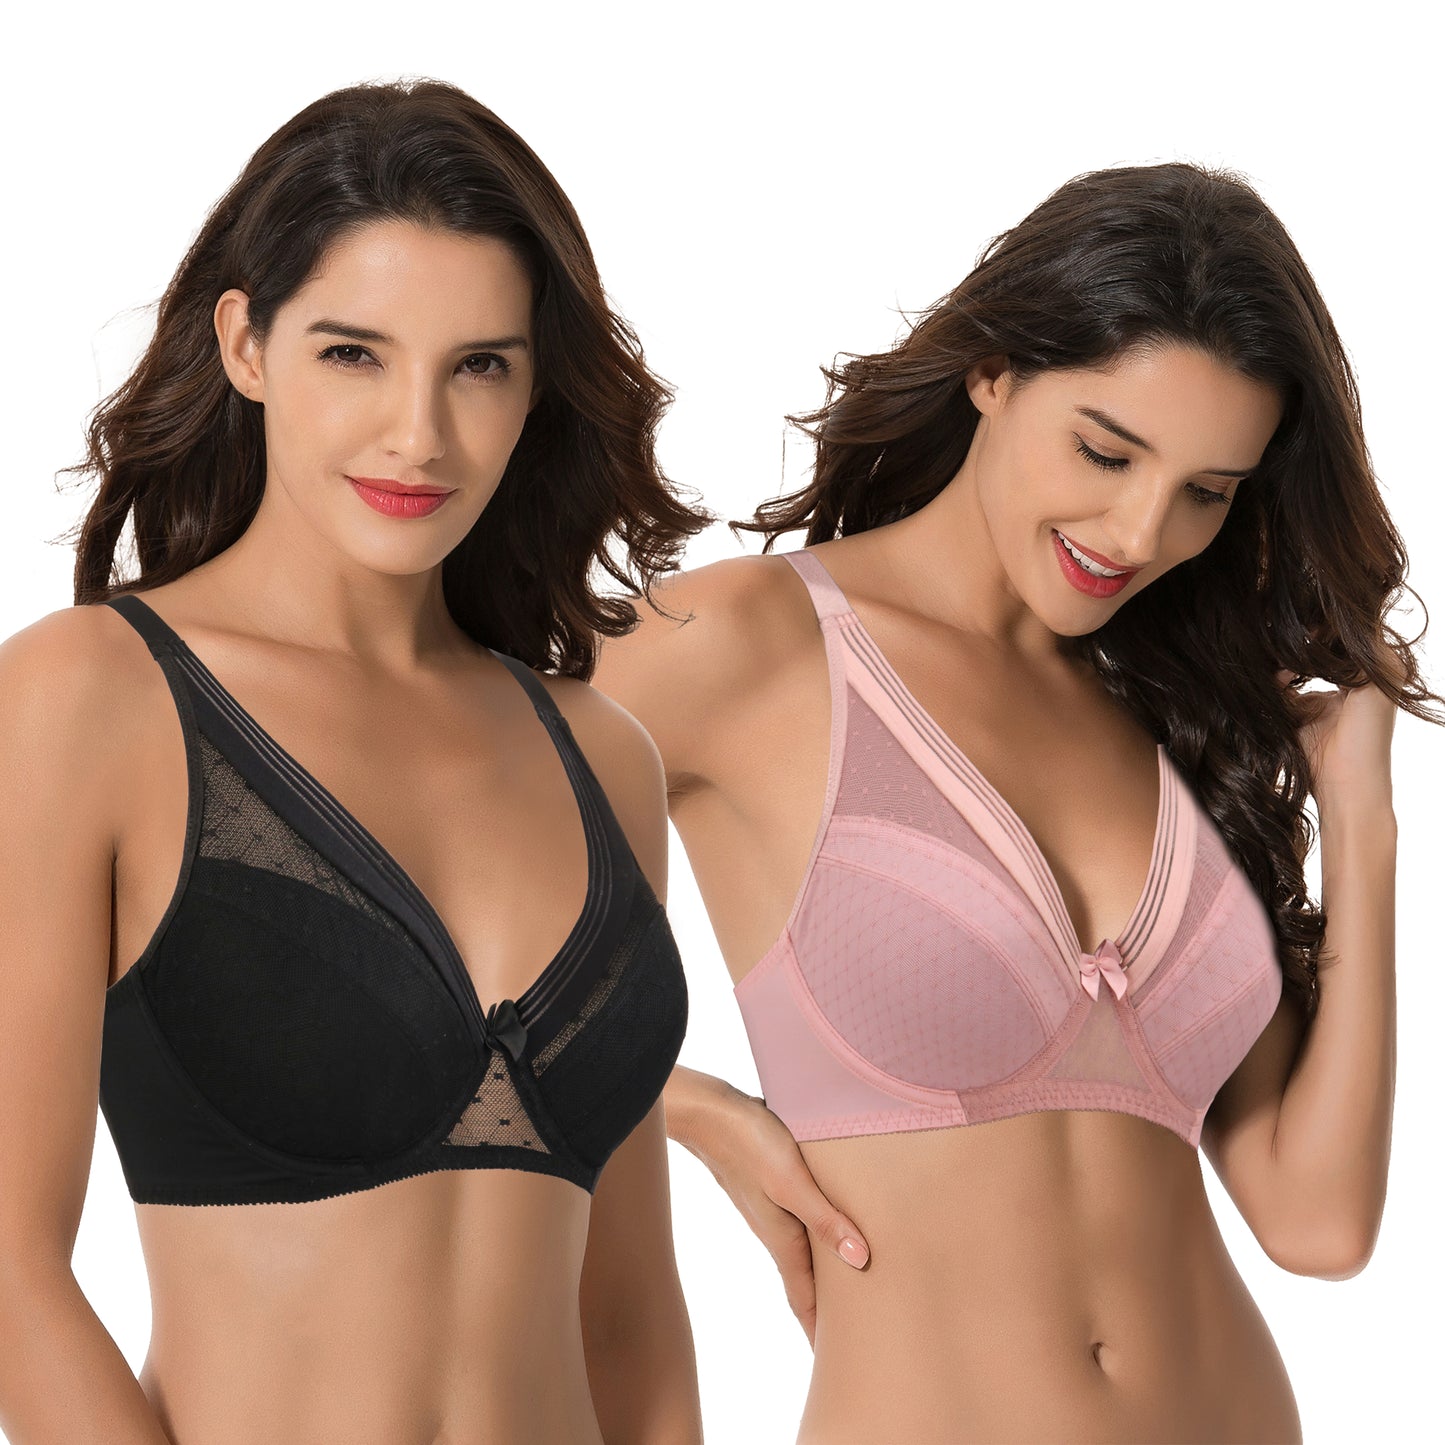 Women's Plus Size Unlined Minimizer Full Coverage Mesh Underwire Bra-2pack-Black,Pink